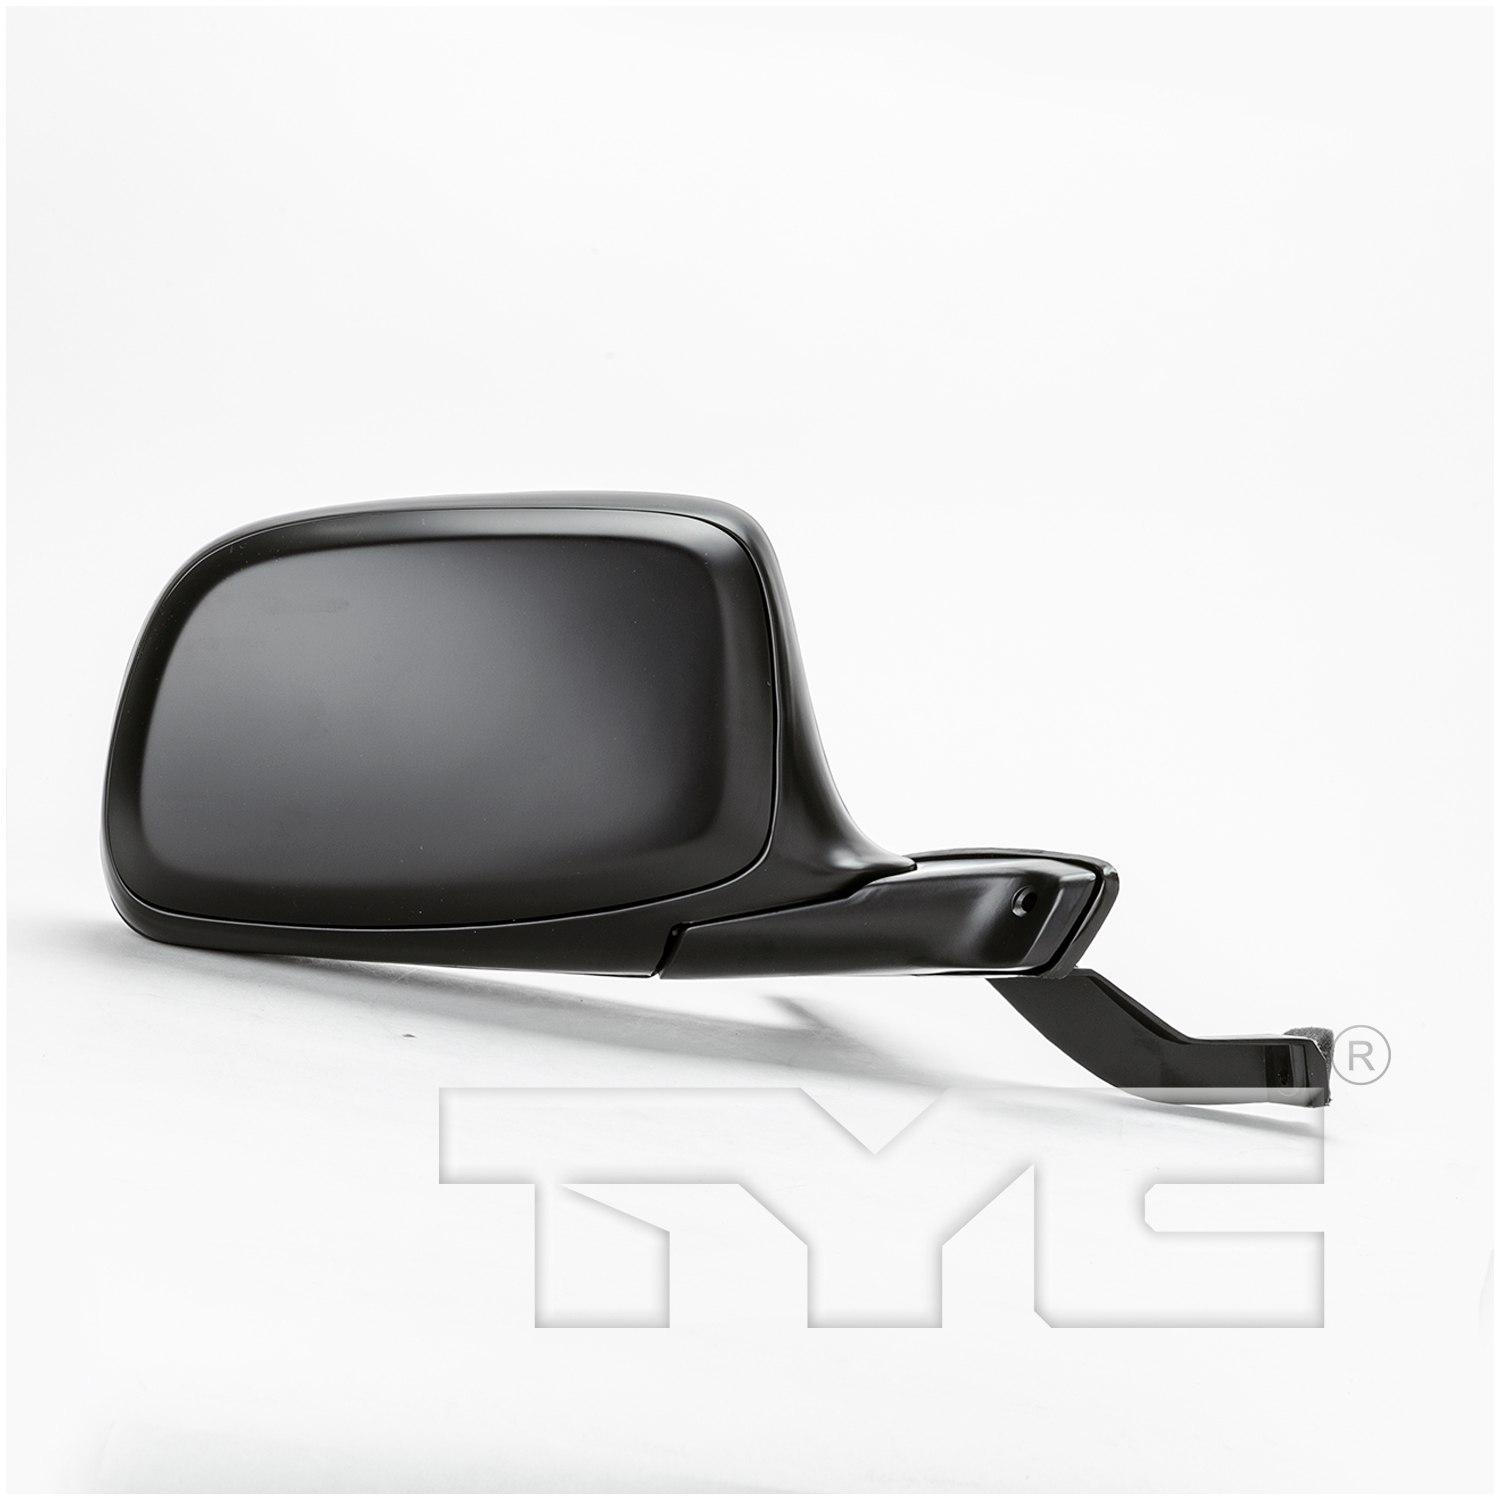 Replacement FORD F150 MIRRORS Aftermarket MIRRORS for FORD F150